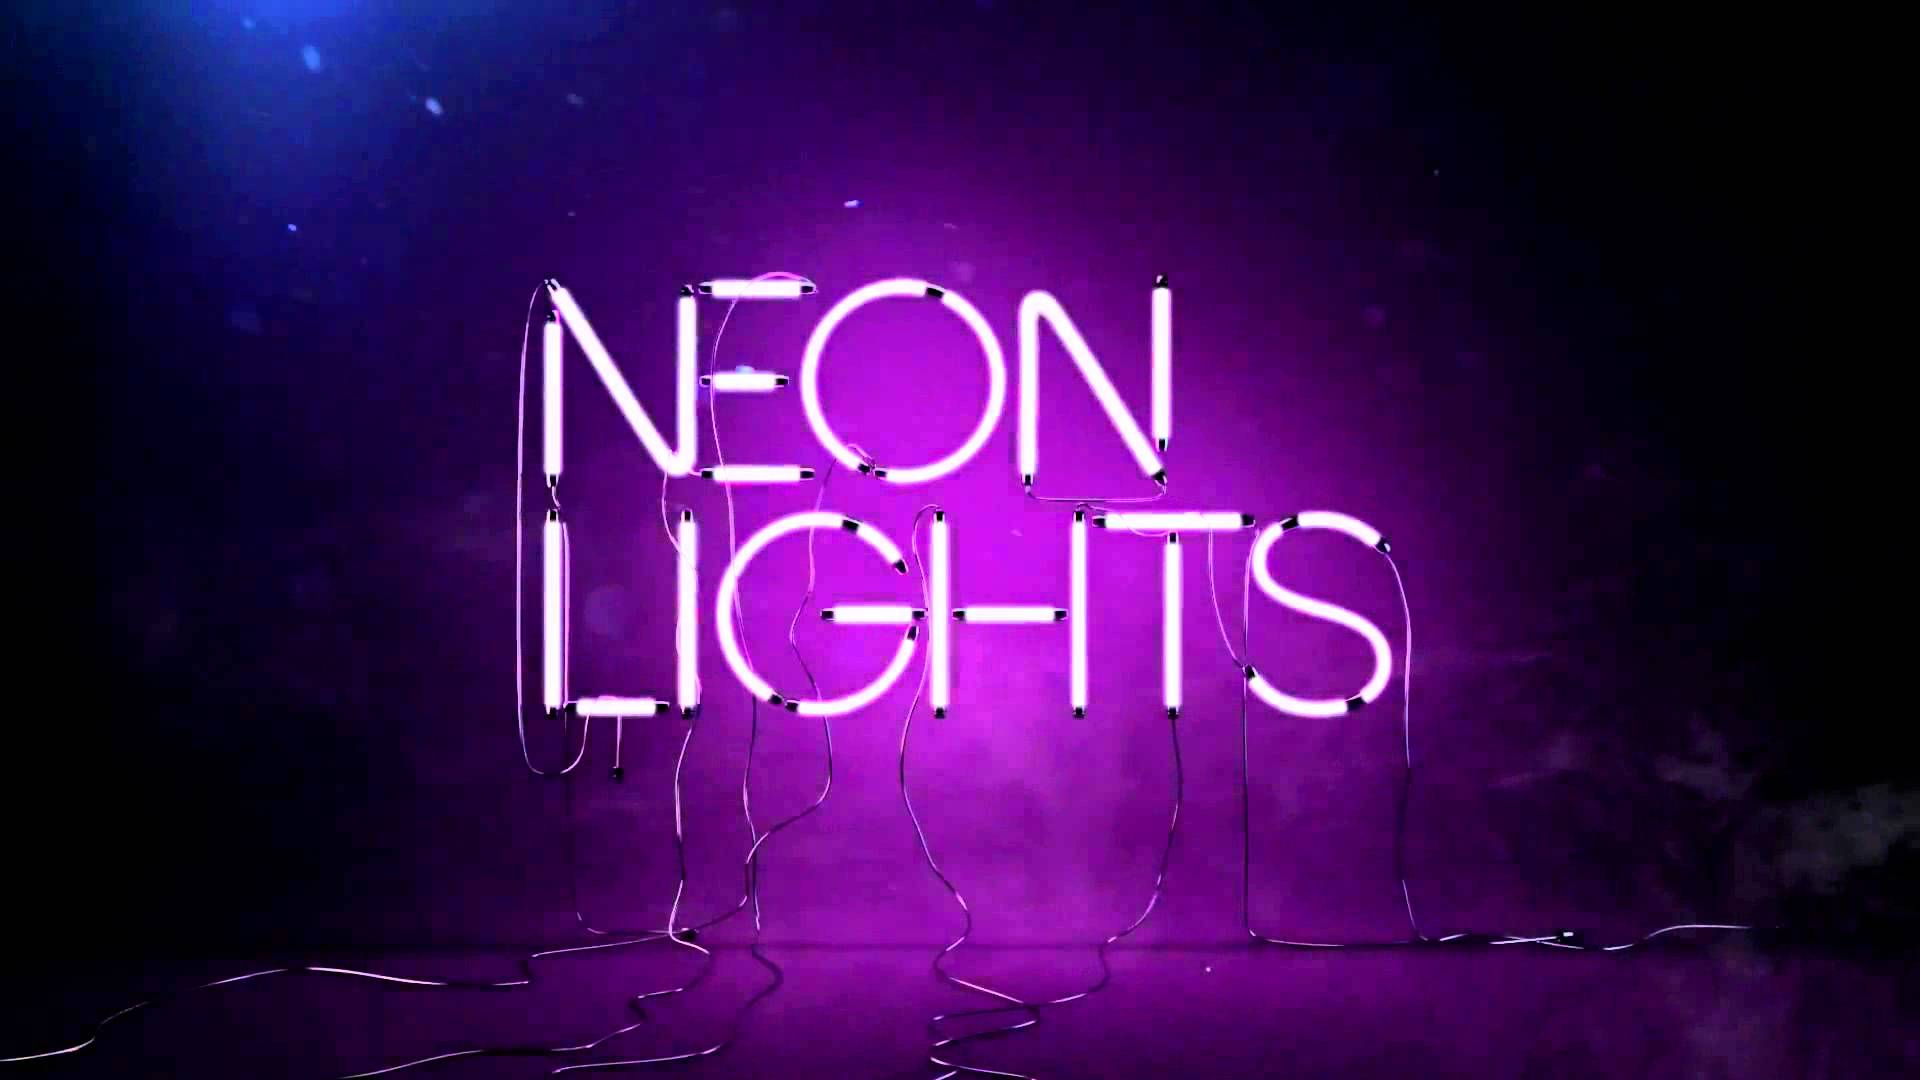 Neon Lights, HD Creative, 4k Wallpaper, Image, Background, Photo and Picture